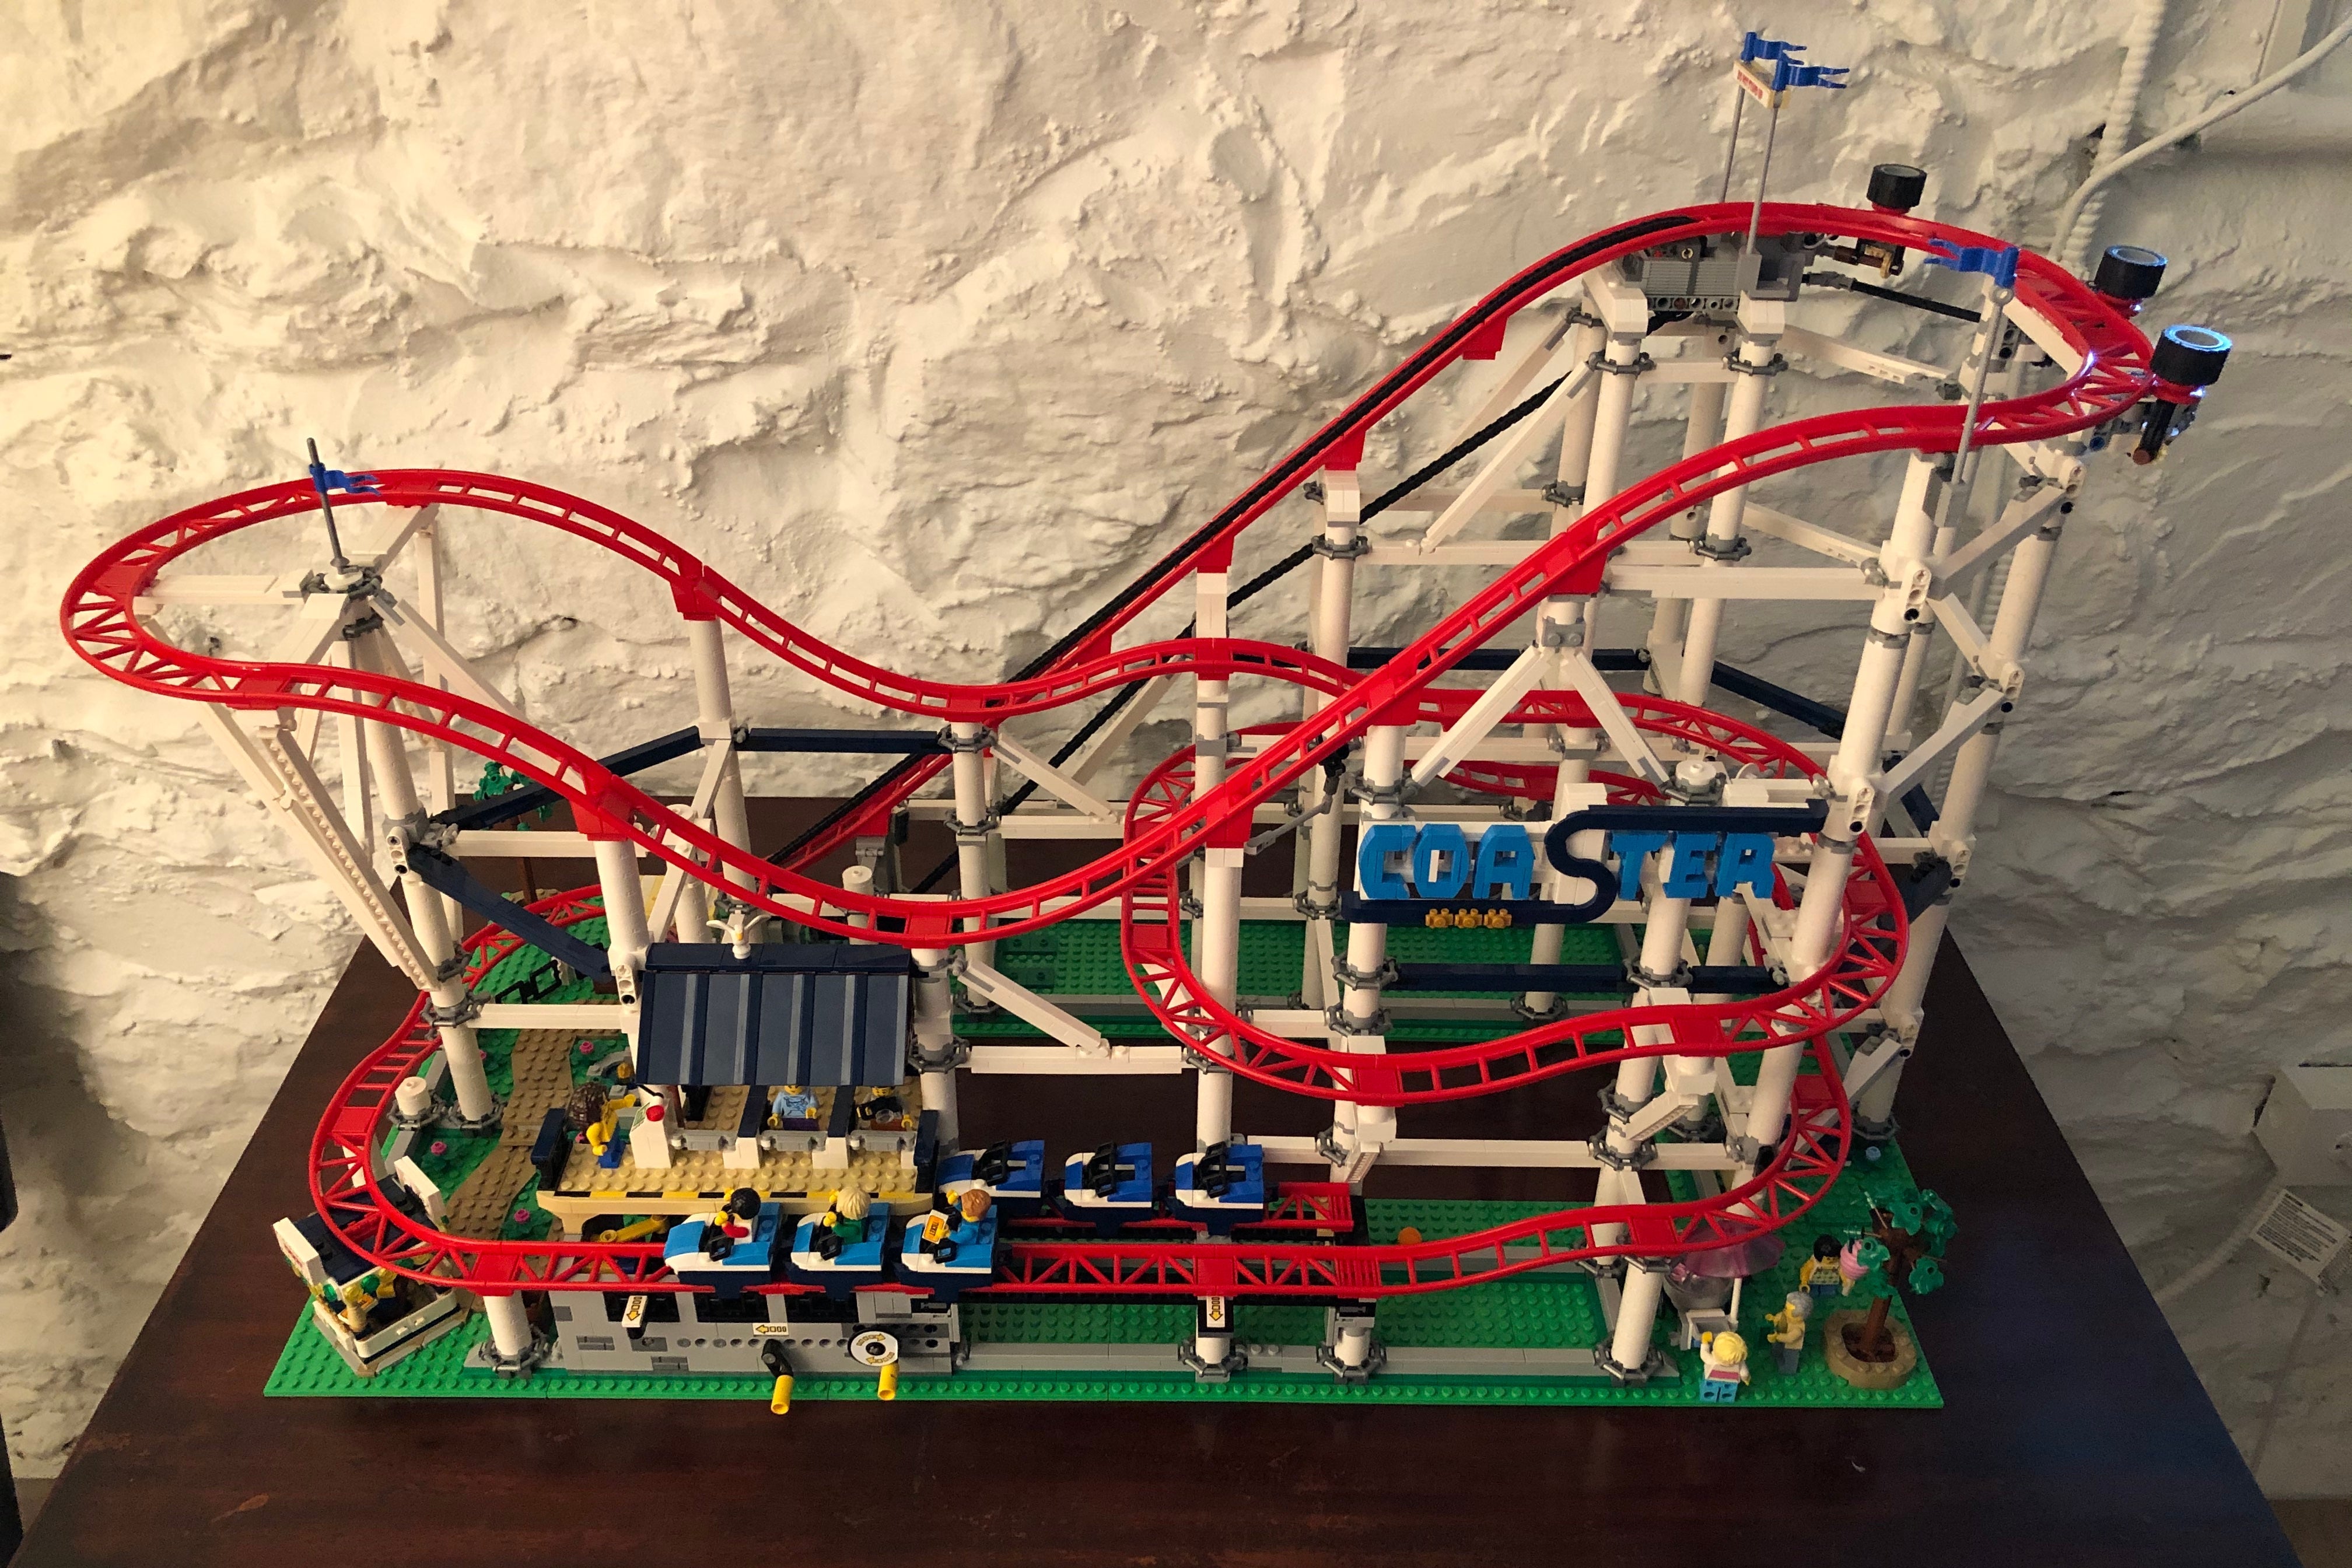 A Lego rollercoaster sitting on a table, complete with moving-looking carts and flags flying high